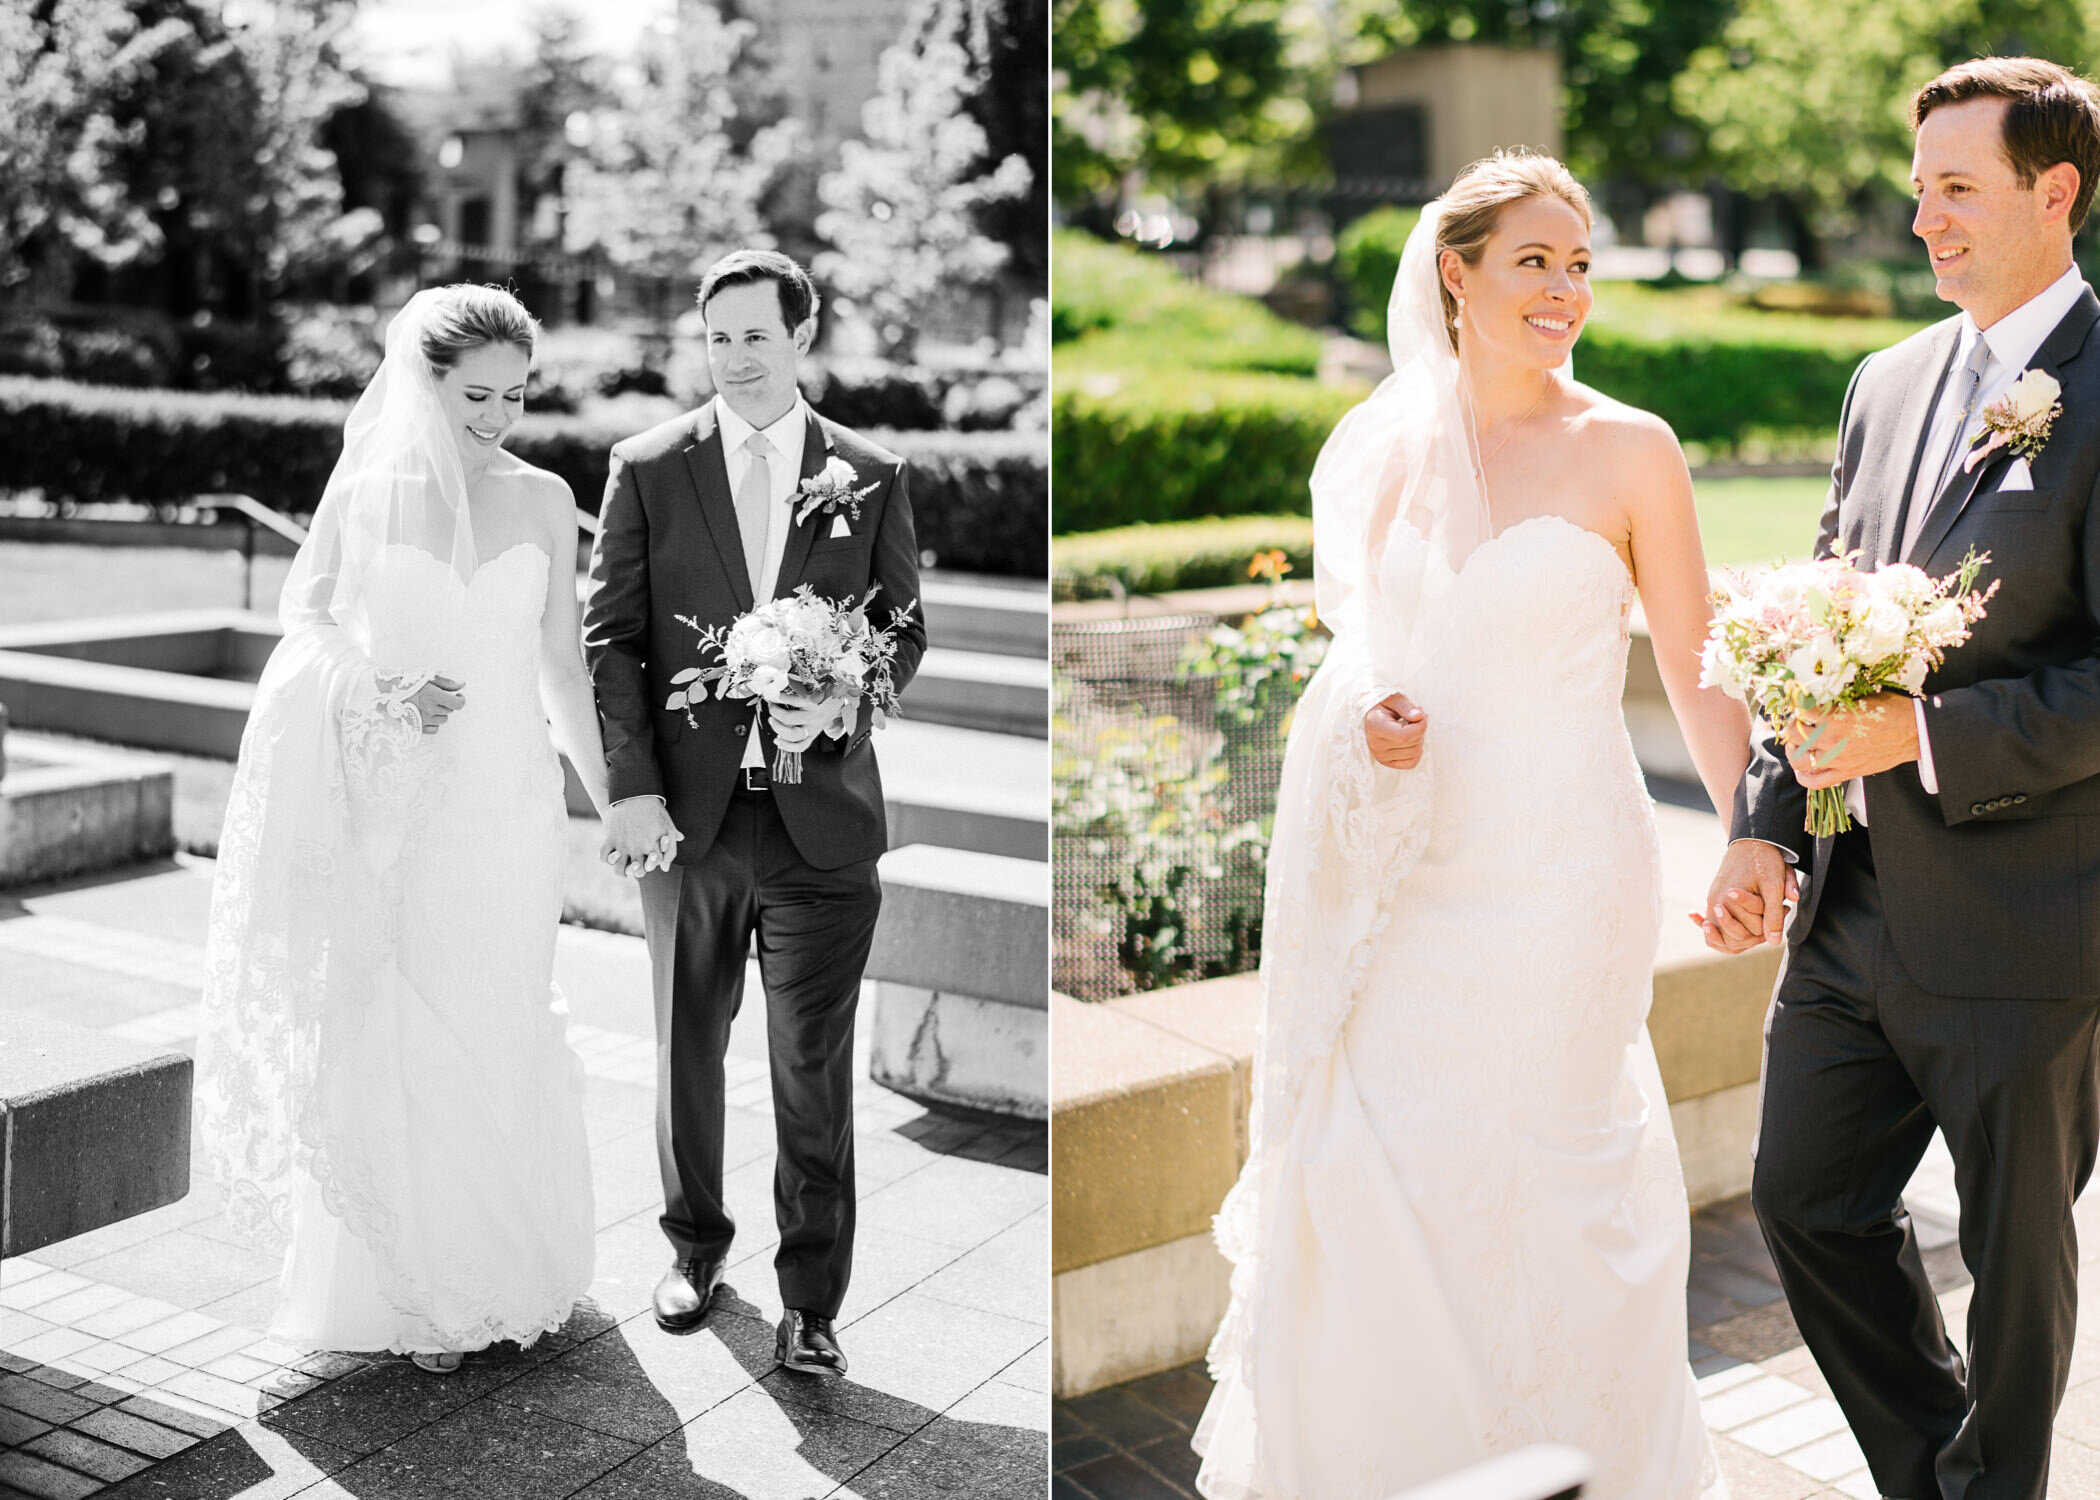  Bride and groom walking together in candid moment in church courtyard 